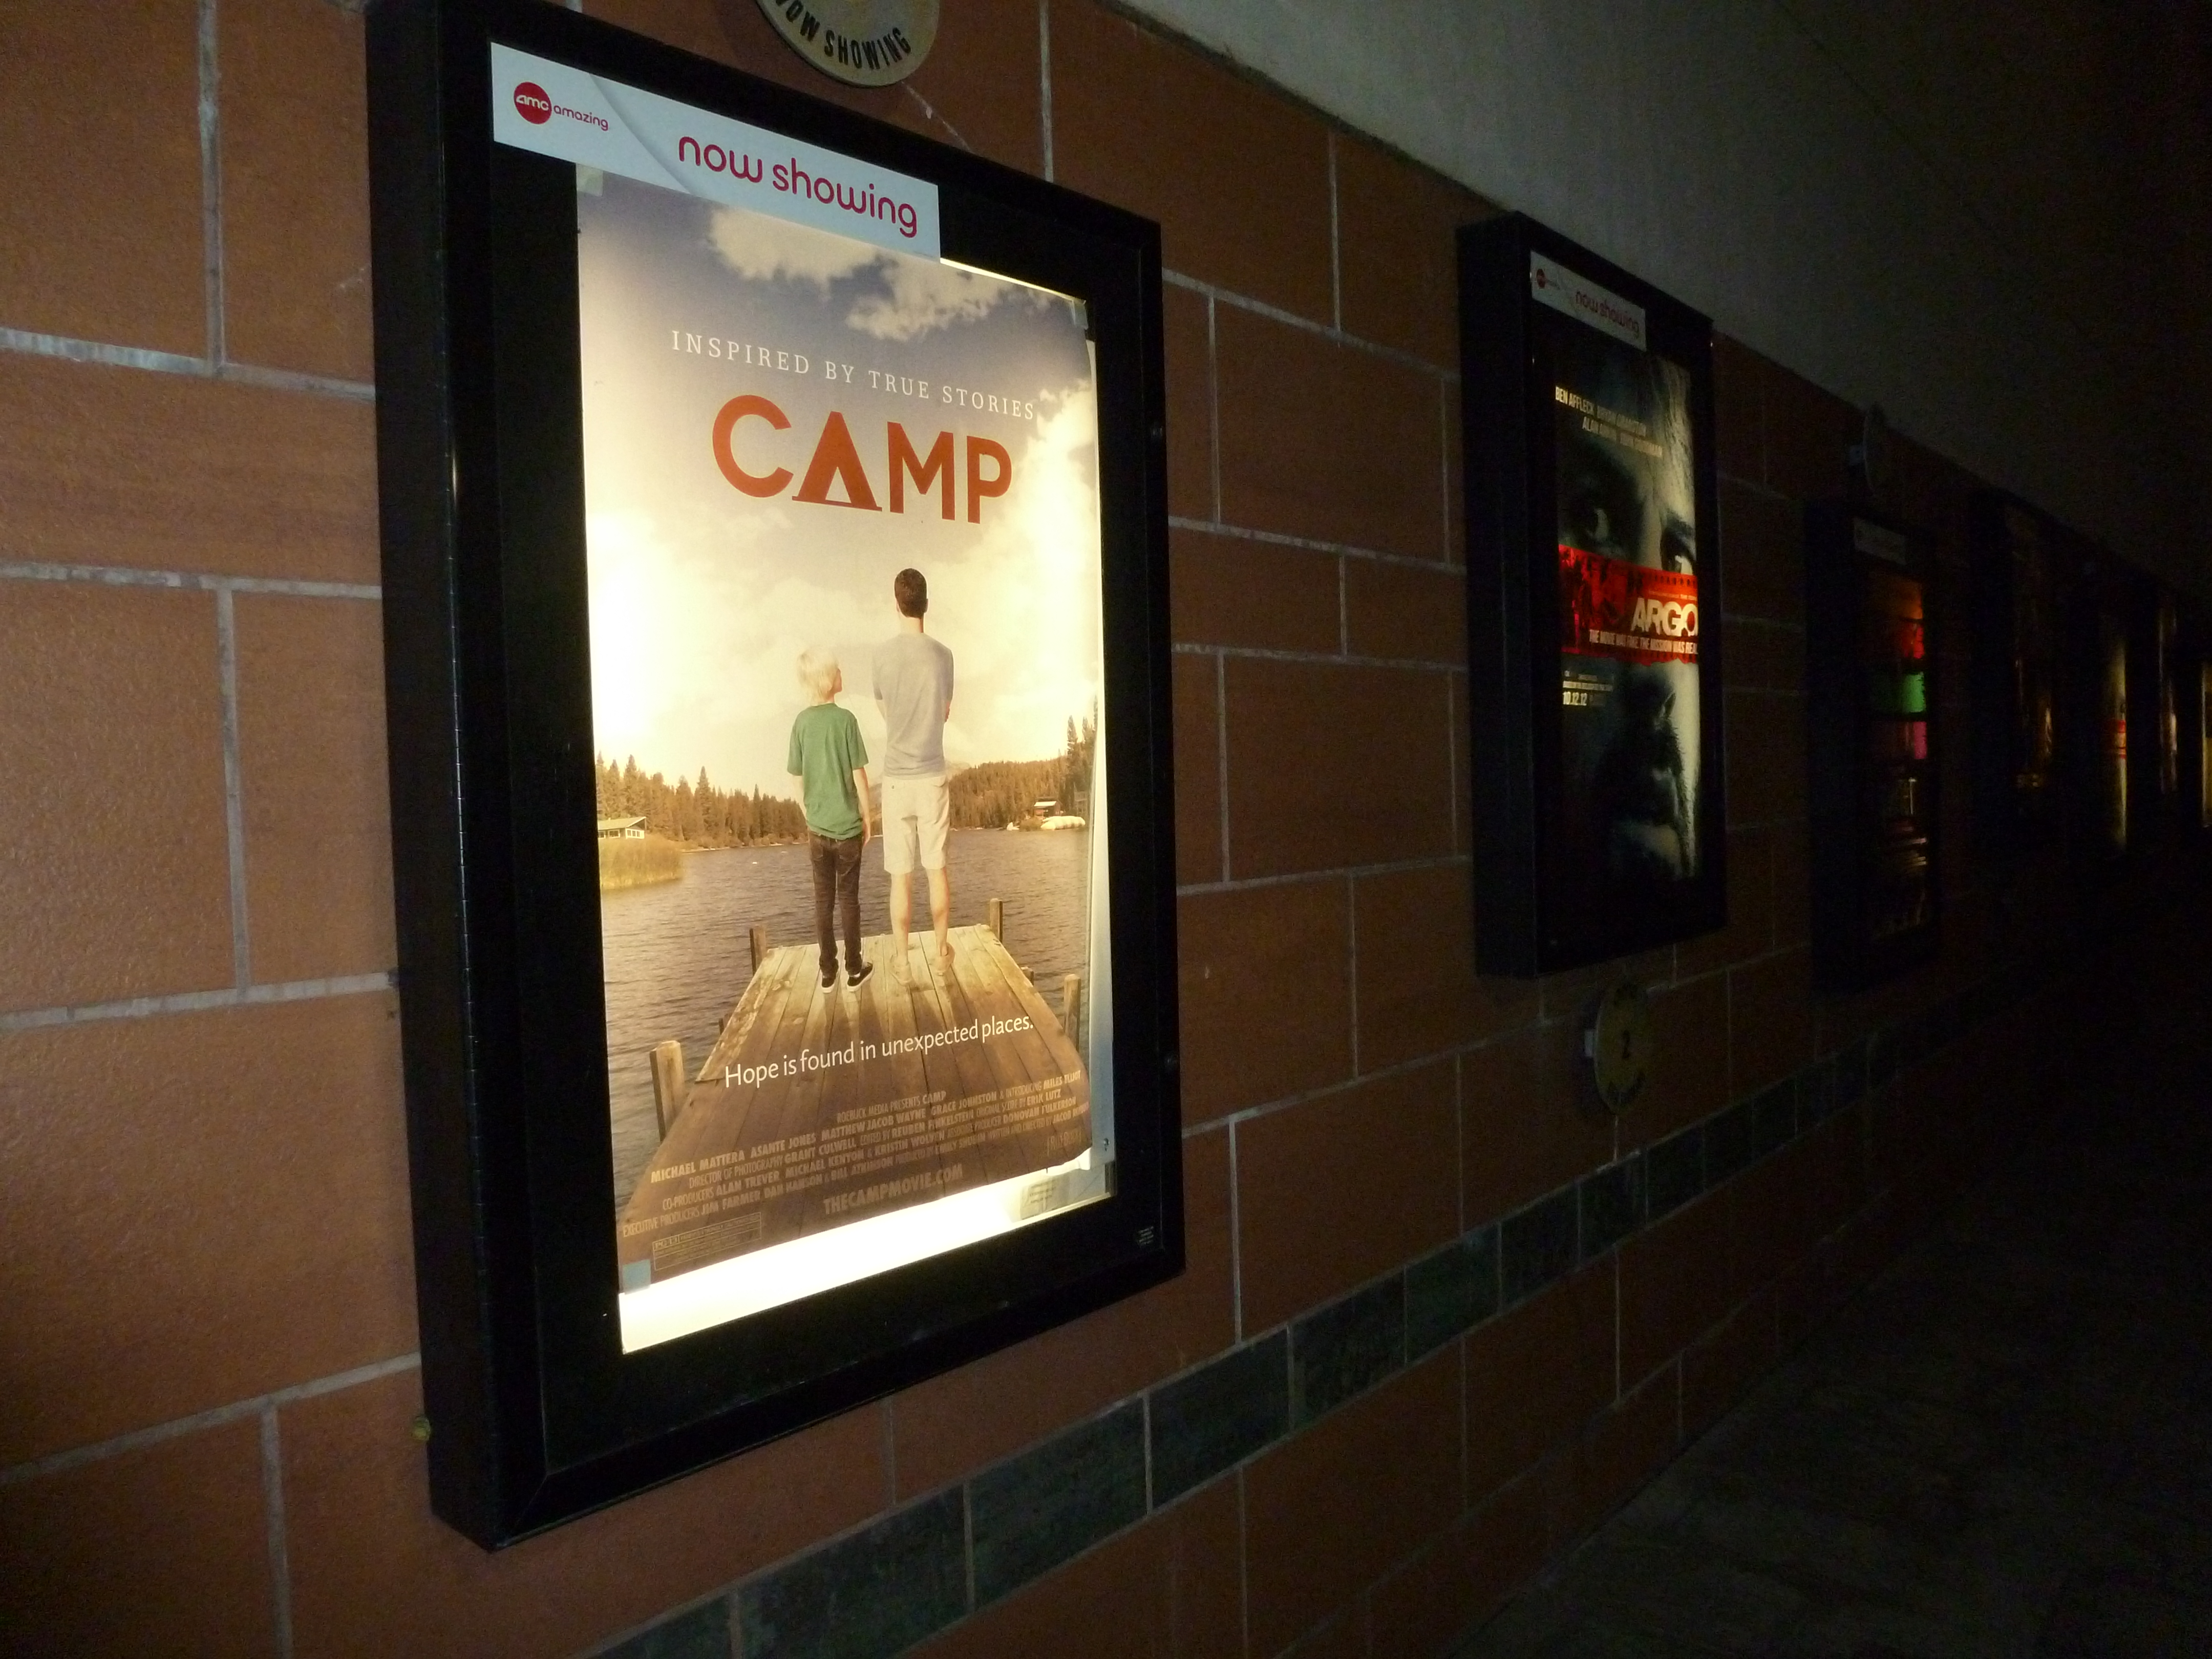 OPENING WEEKEND of the feature film CAMP, at AMC Burbank, CA. Matthew Jacob Wayne stars as 'Redford', in this film. Opened the same weekend as the Oscar Awards (note: the ARGO poster)and was the BIGGEST BOX OFFICE draw at this AMC, for the weekend!!